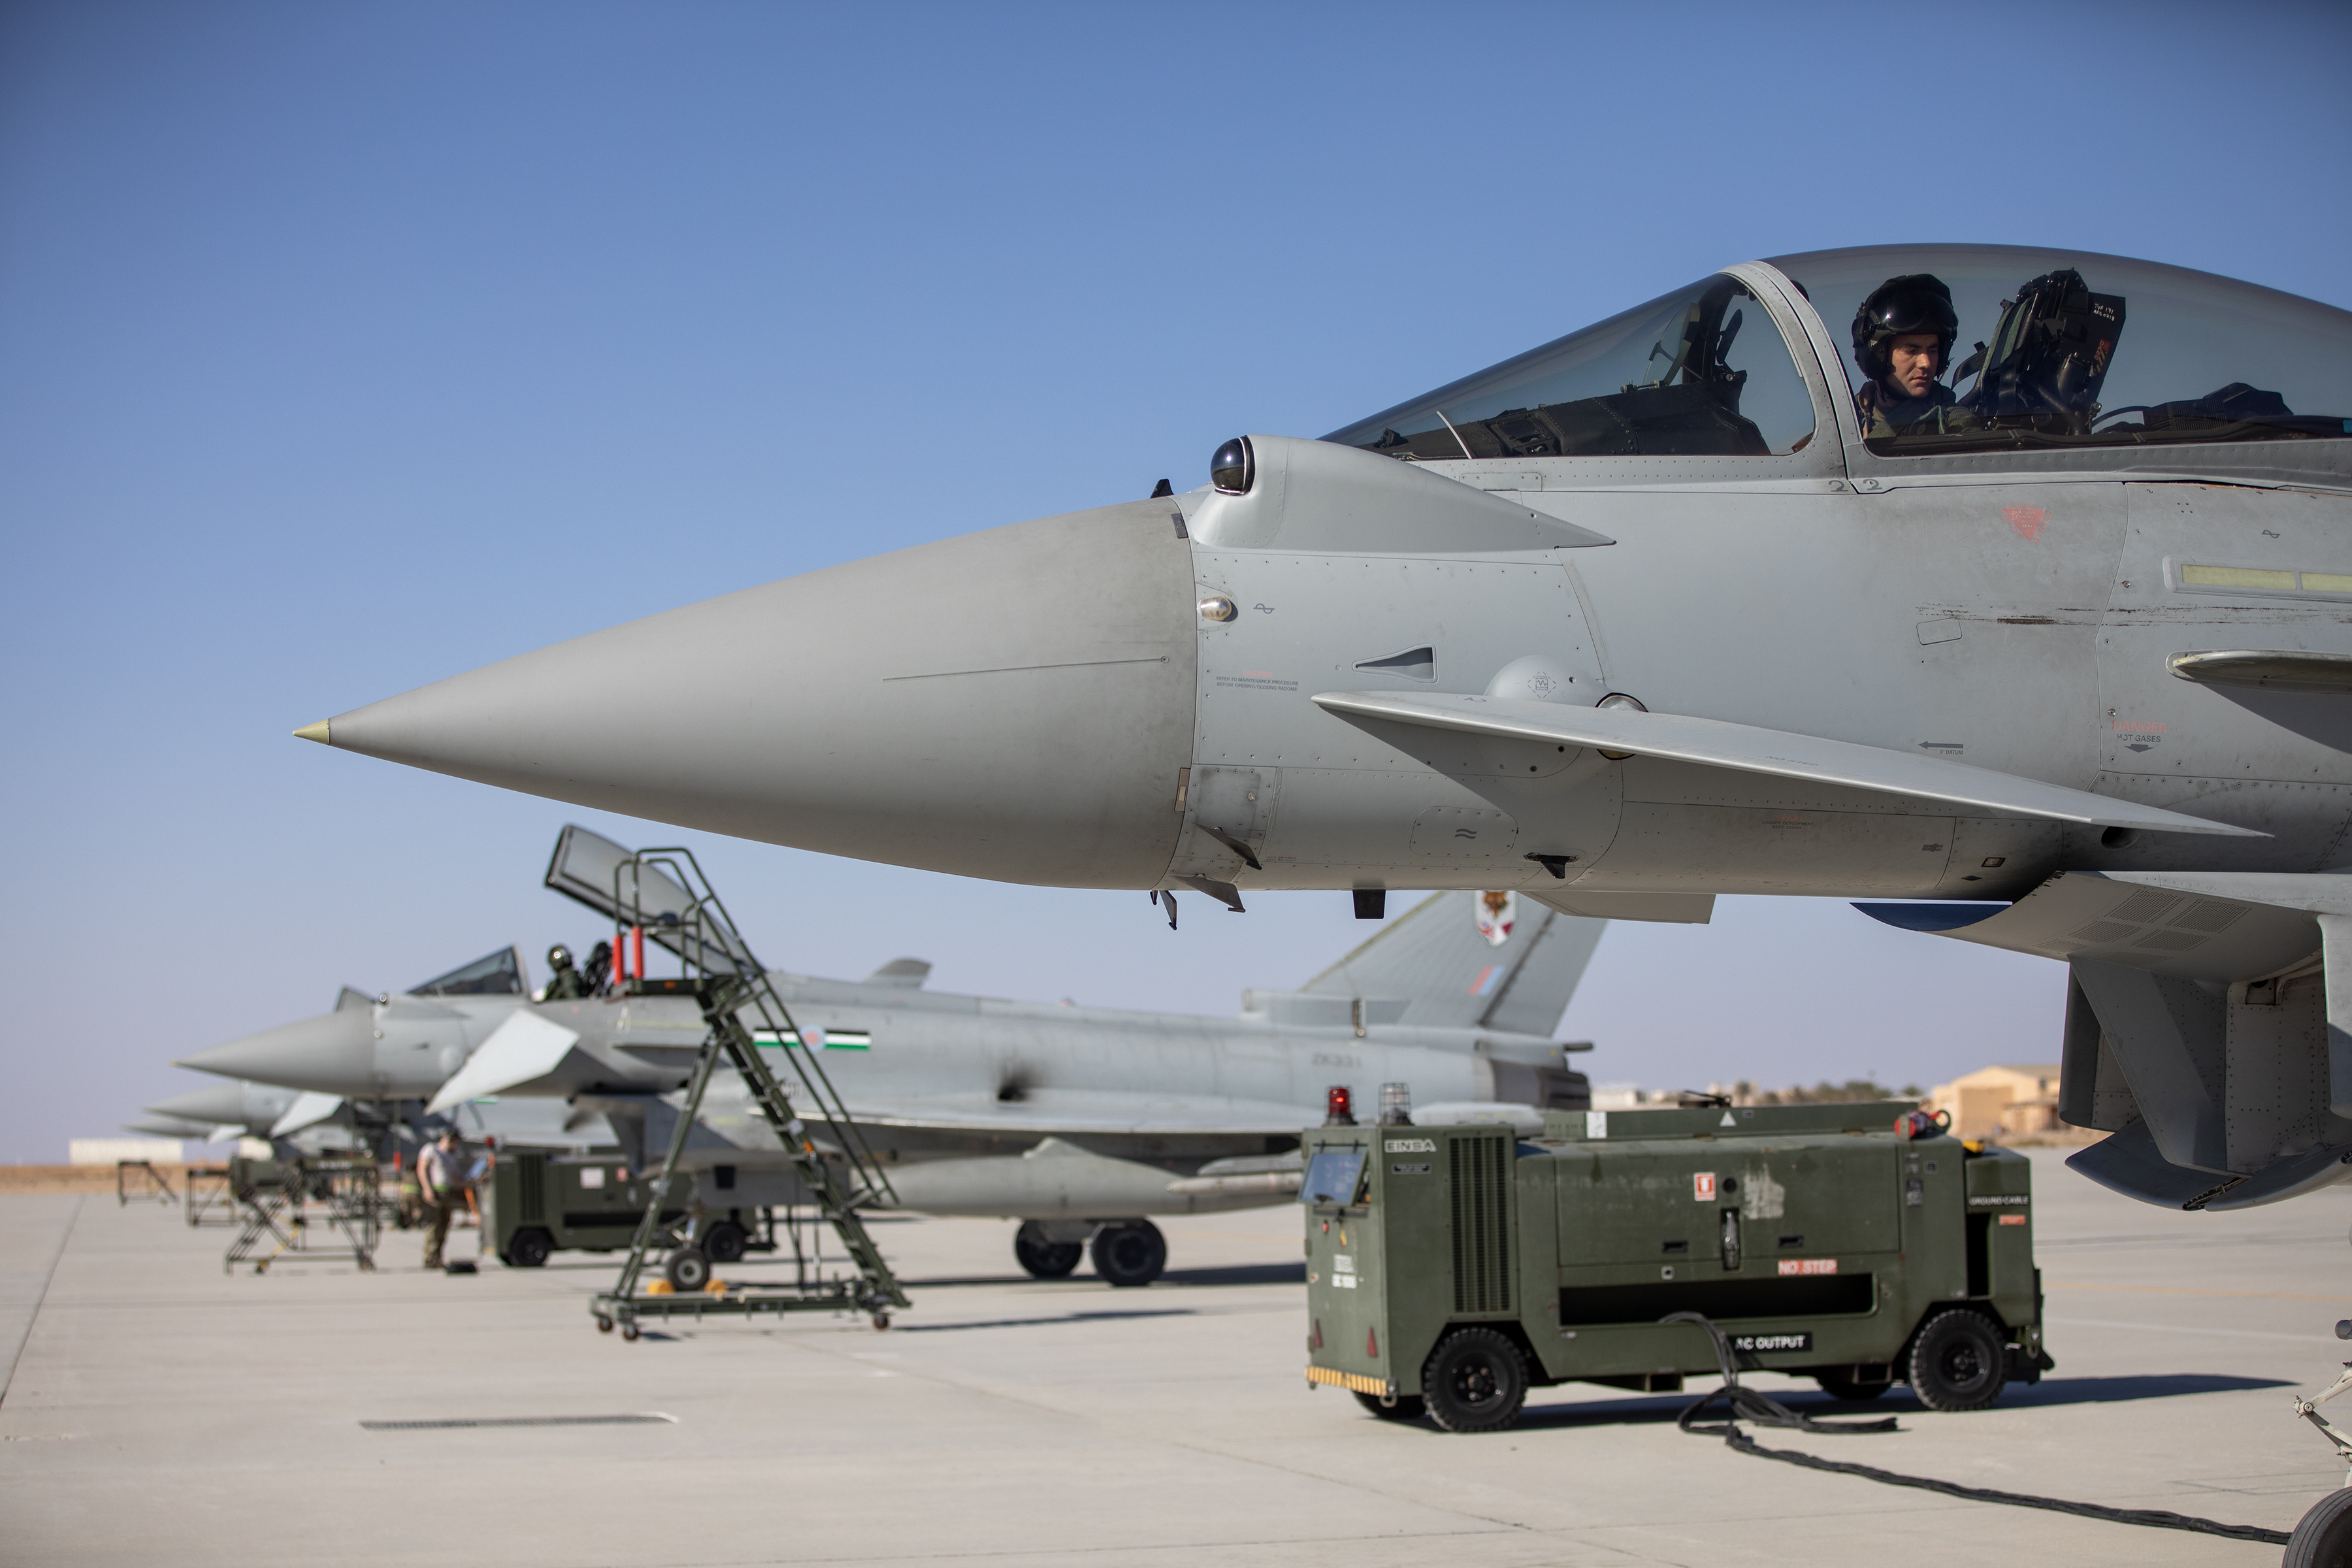 Image shows RAF personnel sitting in the cockpit of Typhoons on the airfield.